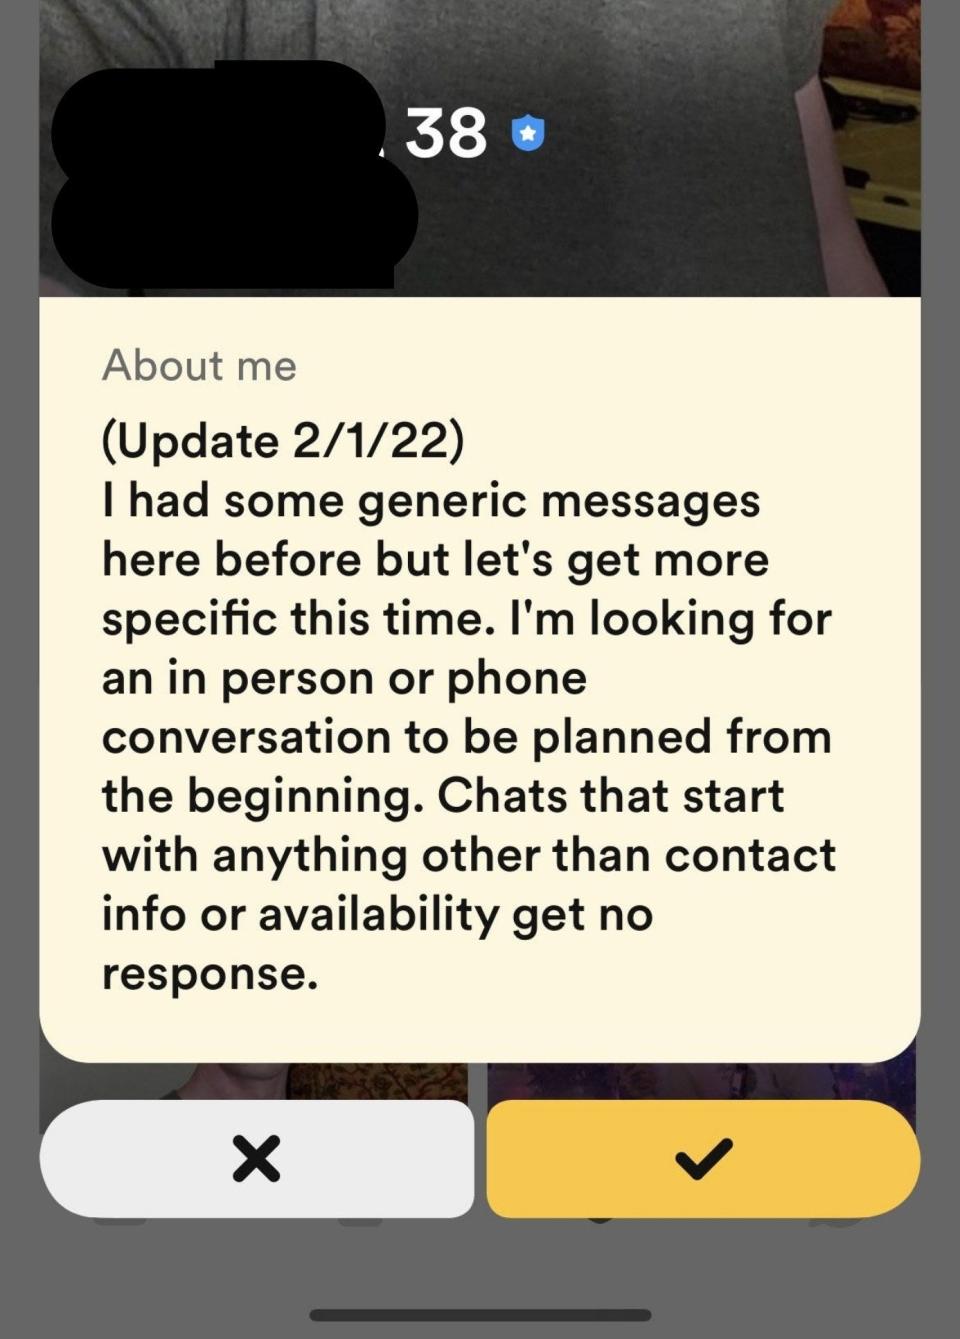 This person's about me includes a date when it was updated and says they're "looking for an in-person or phone conversation to be planned from the beginning, chats that start with anything other than contact info or availability get no response"